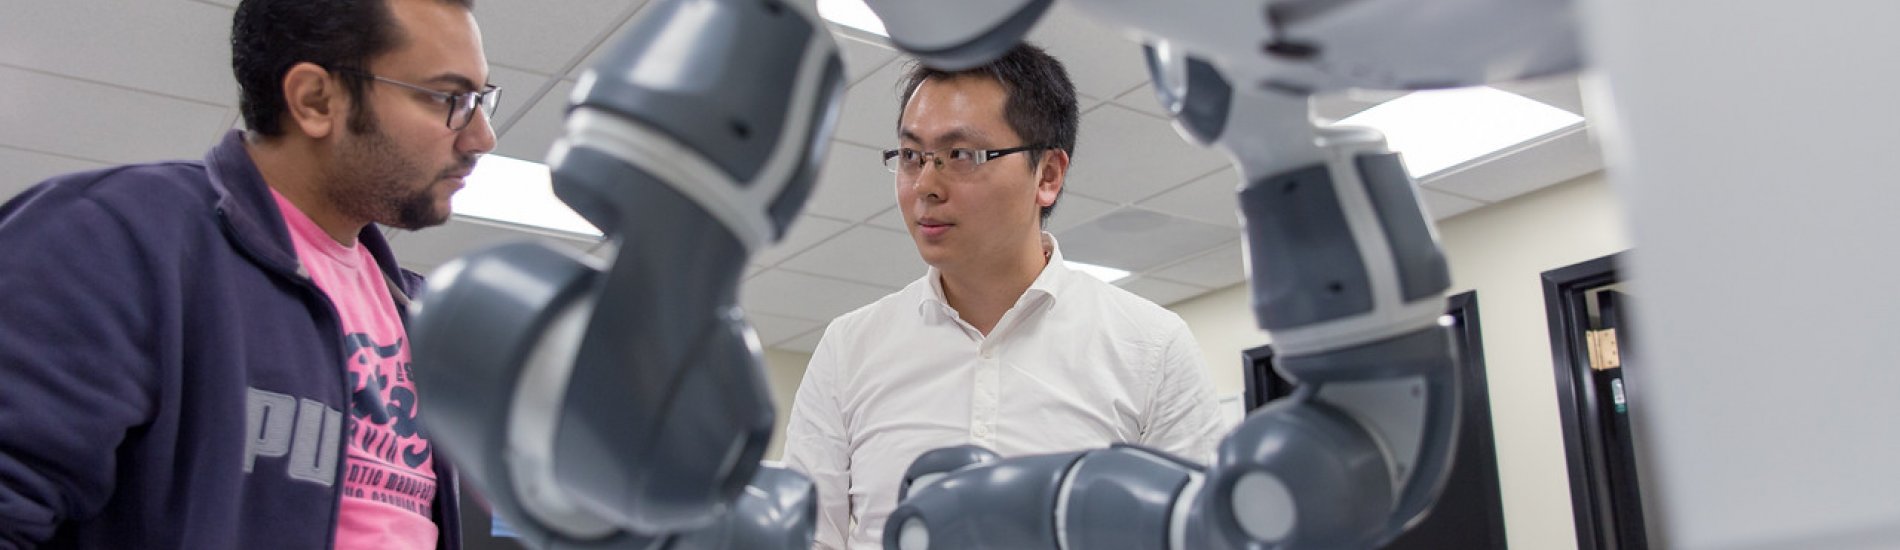 Researchers work on robotic arms